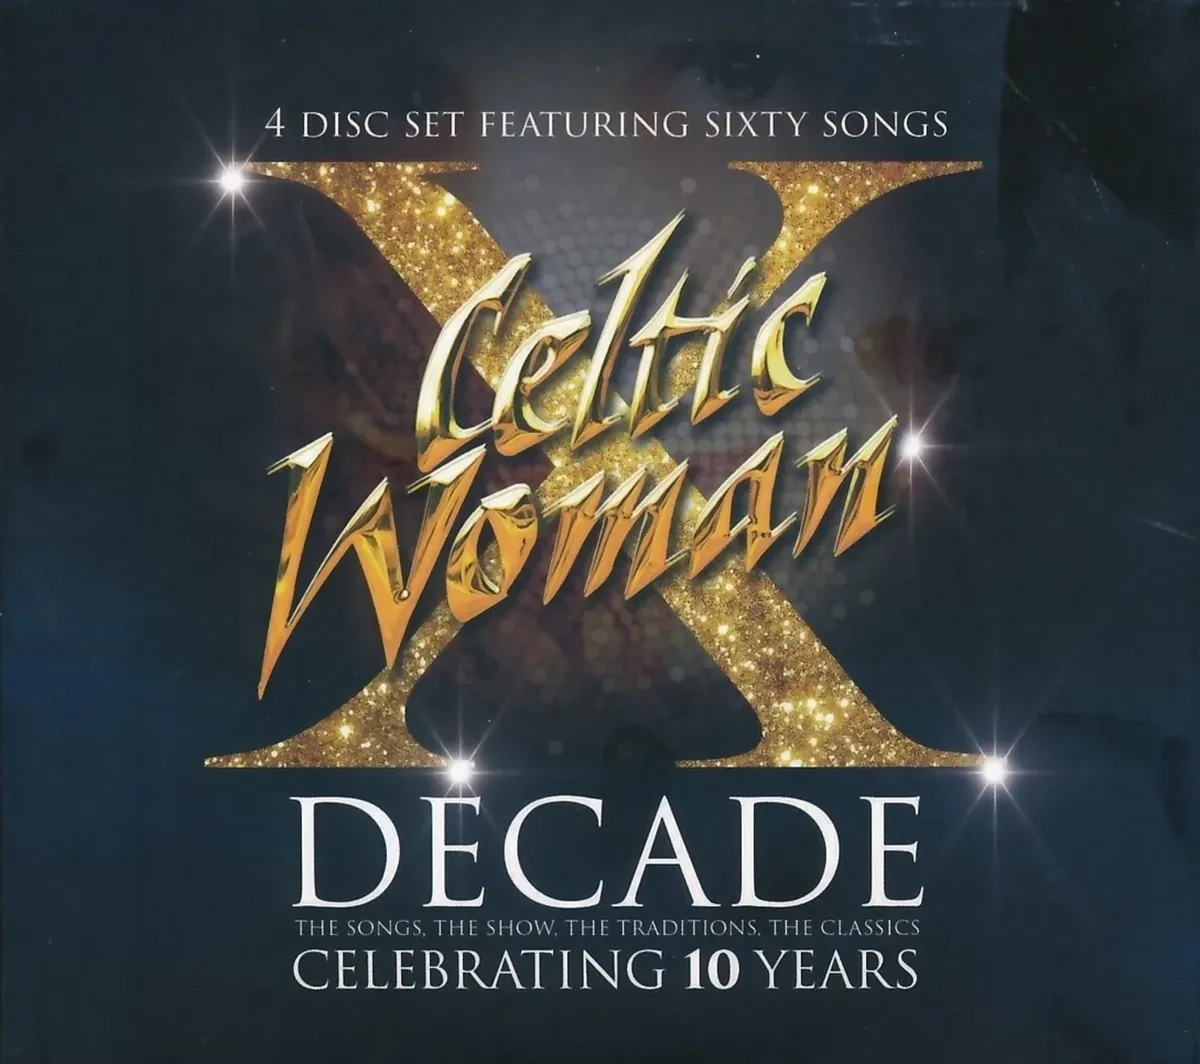 Decade - Celebrating 10 Years - Celtic Woman. (CD)